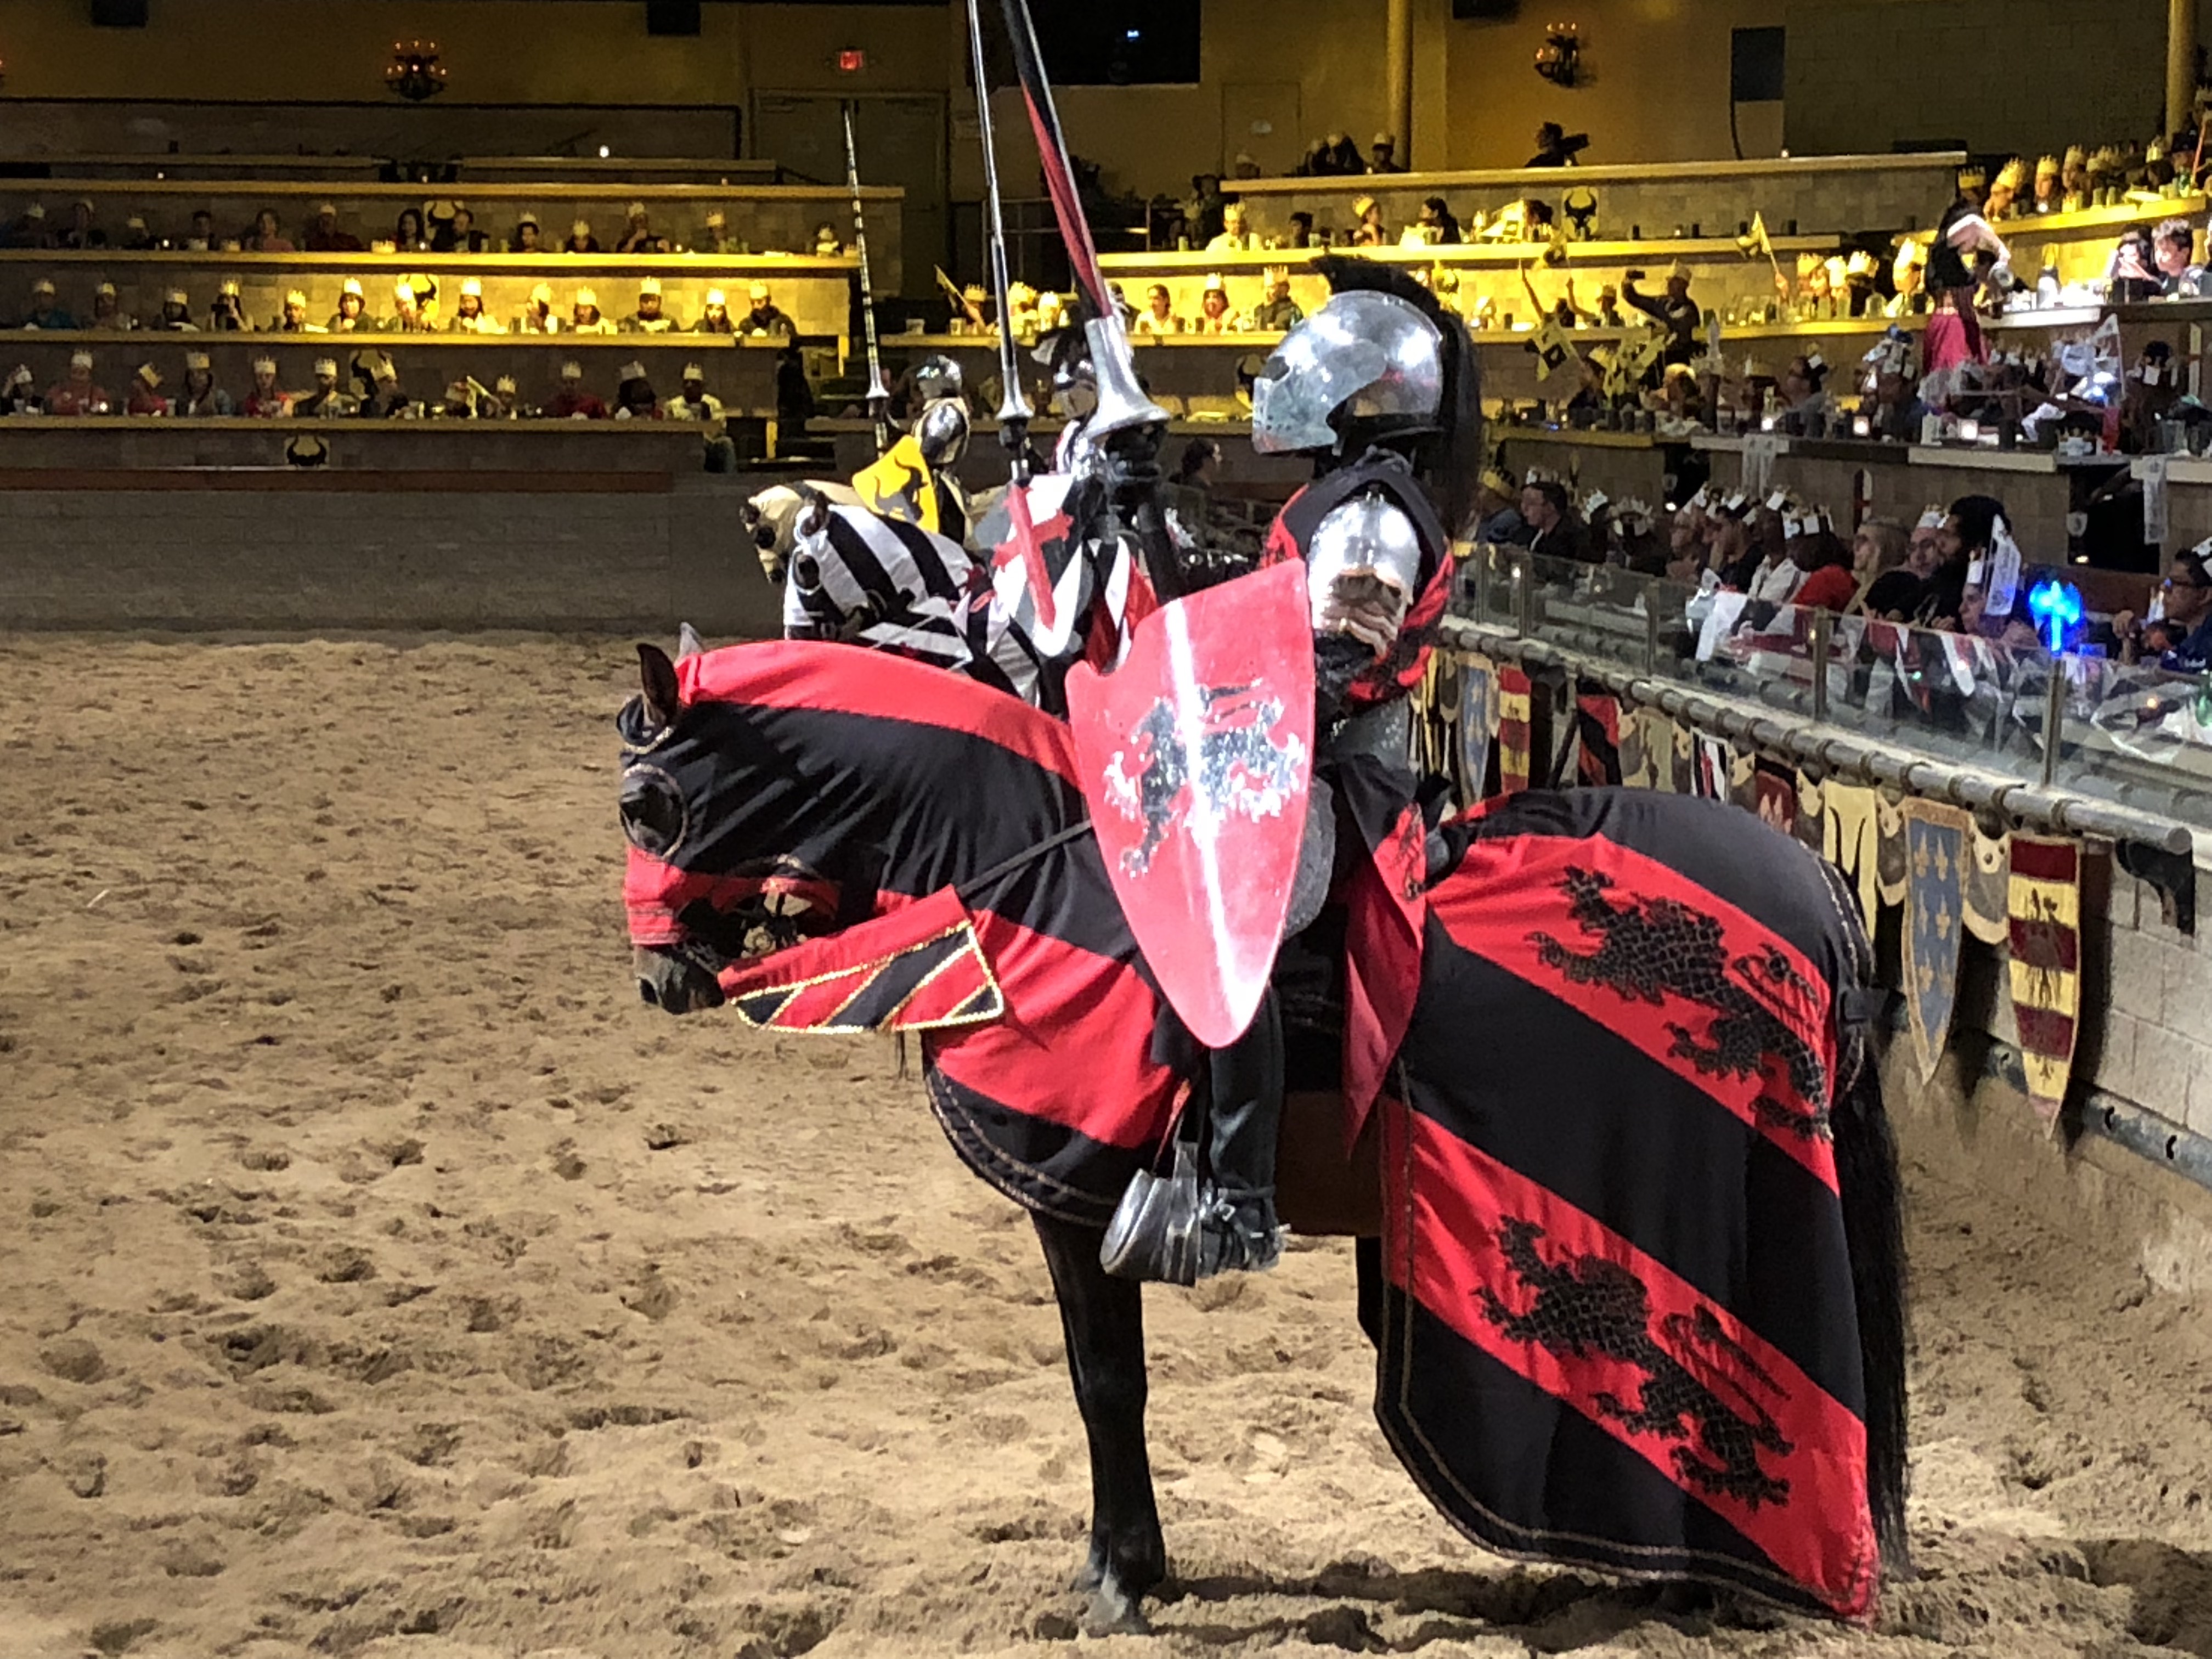 New Show At Medieval Times Dinner and Tournament Buena Park